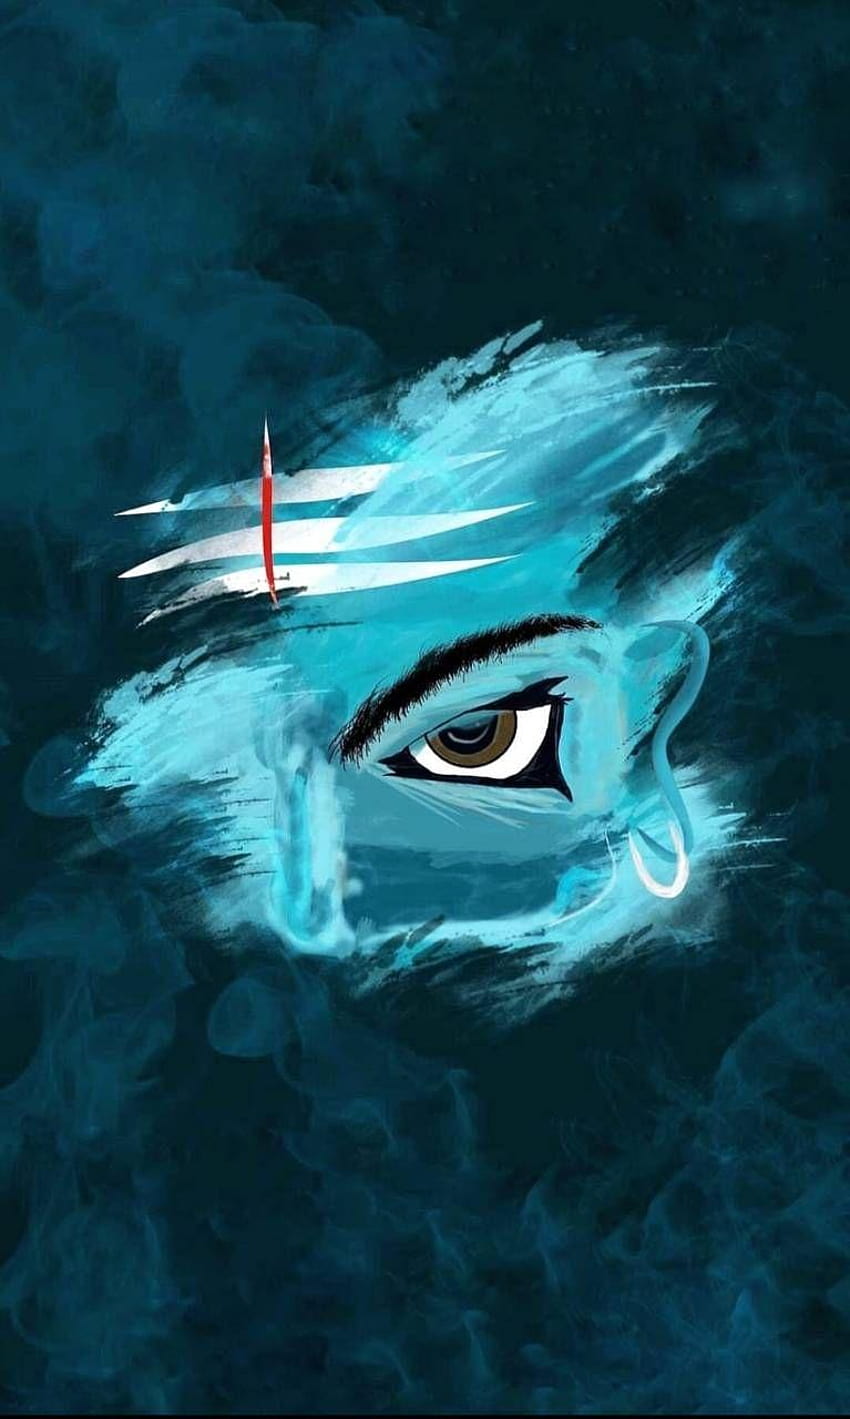 Find millions of popular and ringtones on ZEDGE, lord shiva mobile HD phone wallpaper